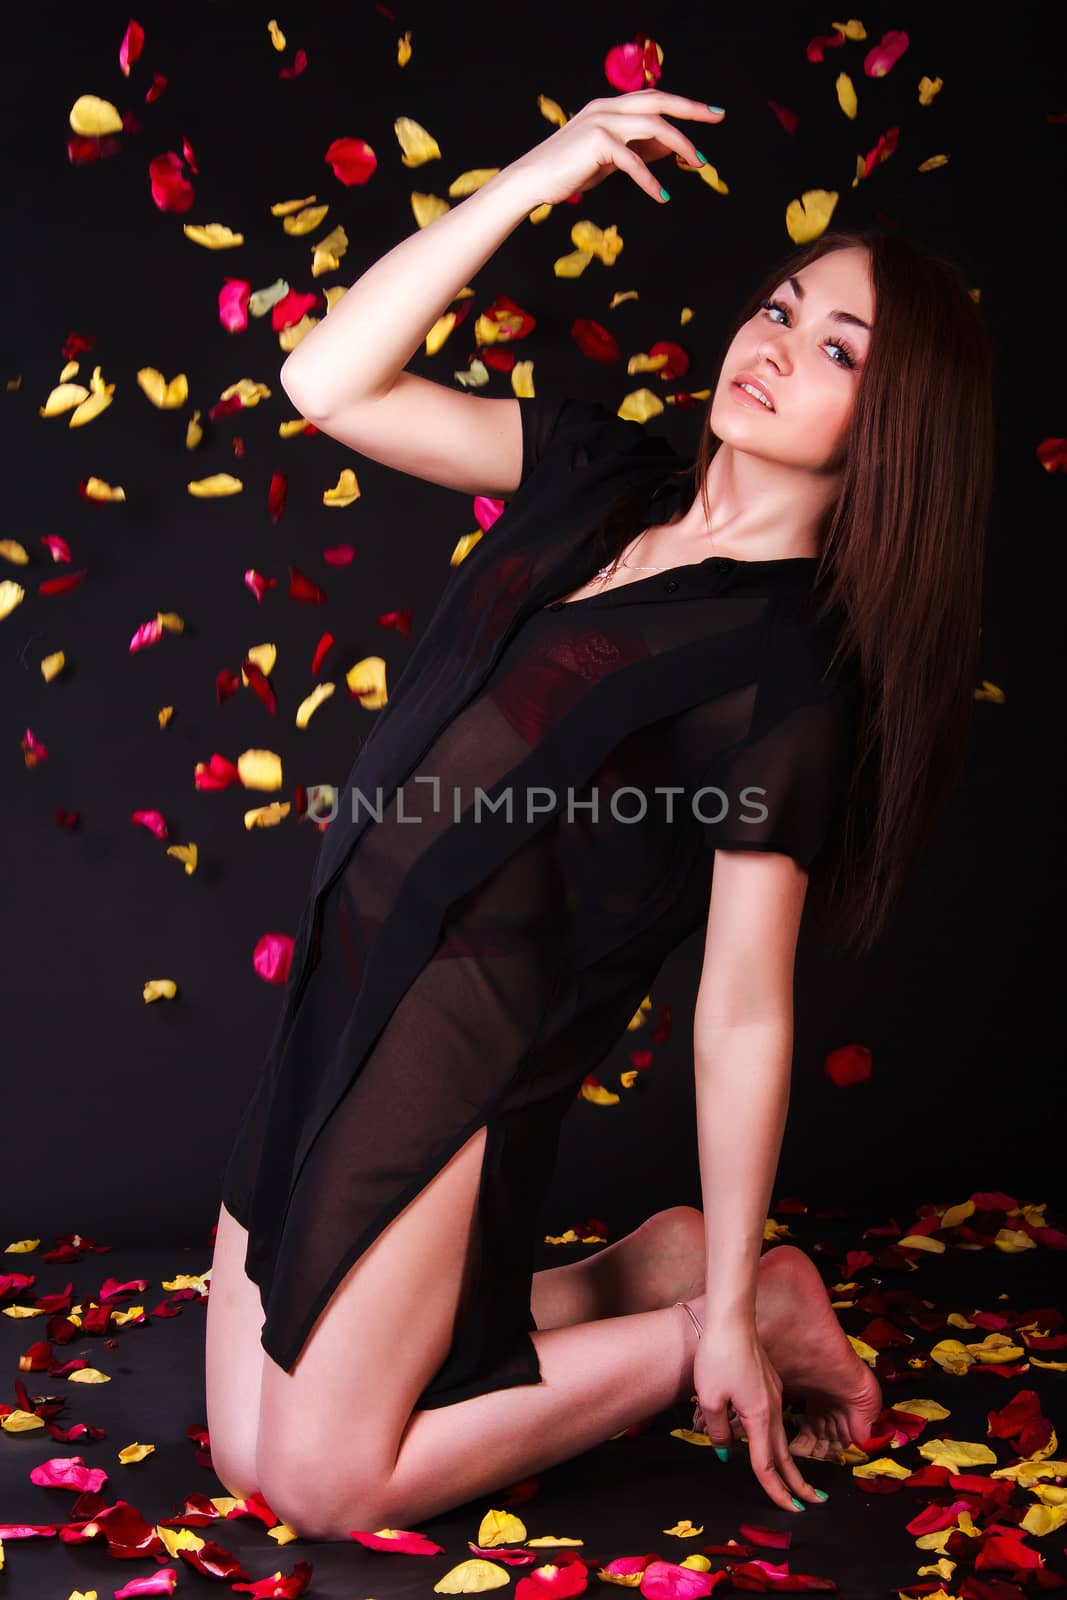 Beautiful young woman sitting under the falling petals over black background